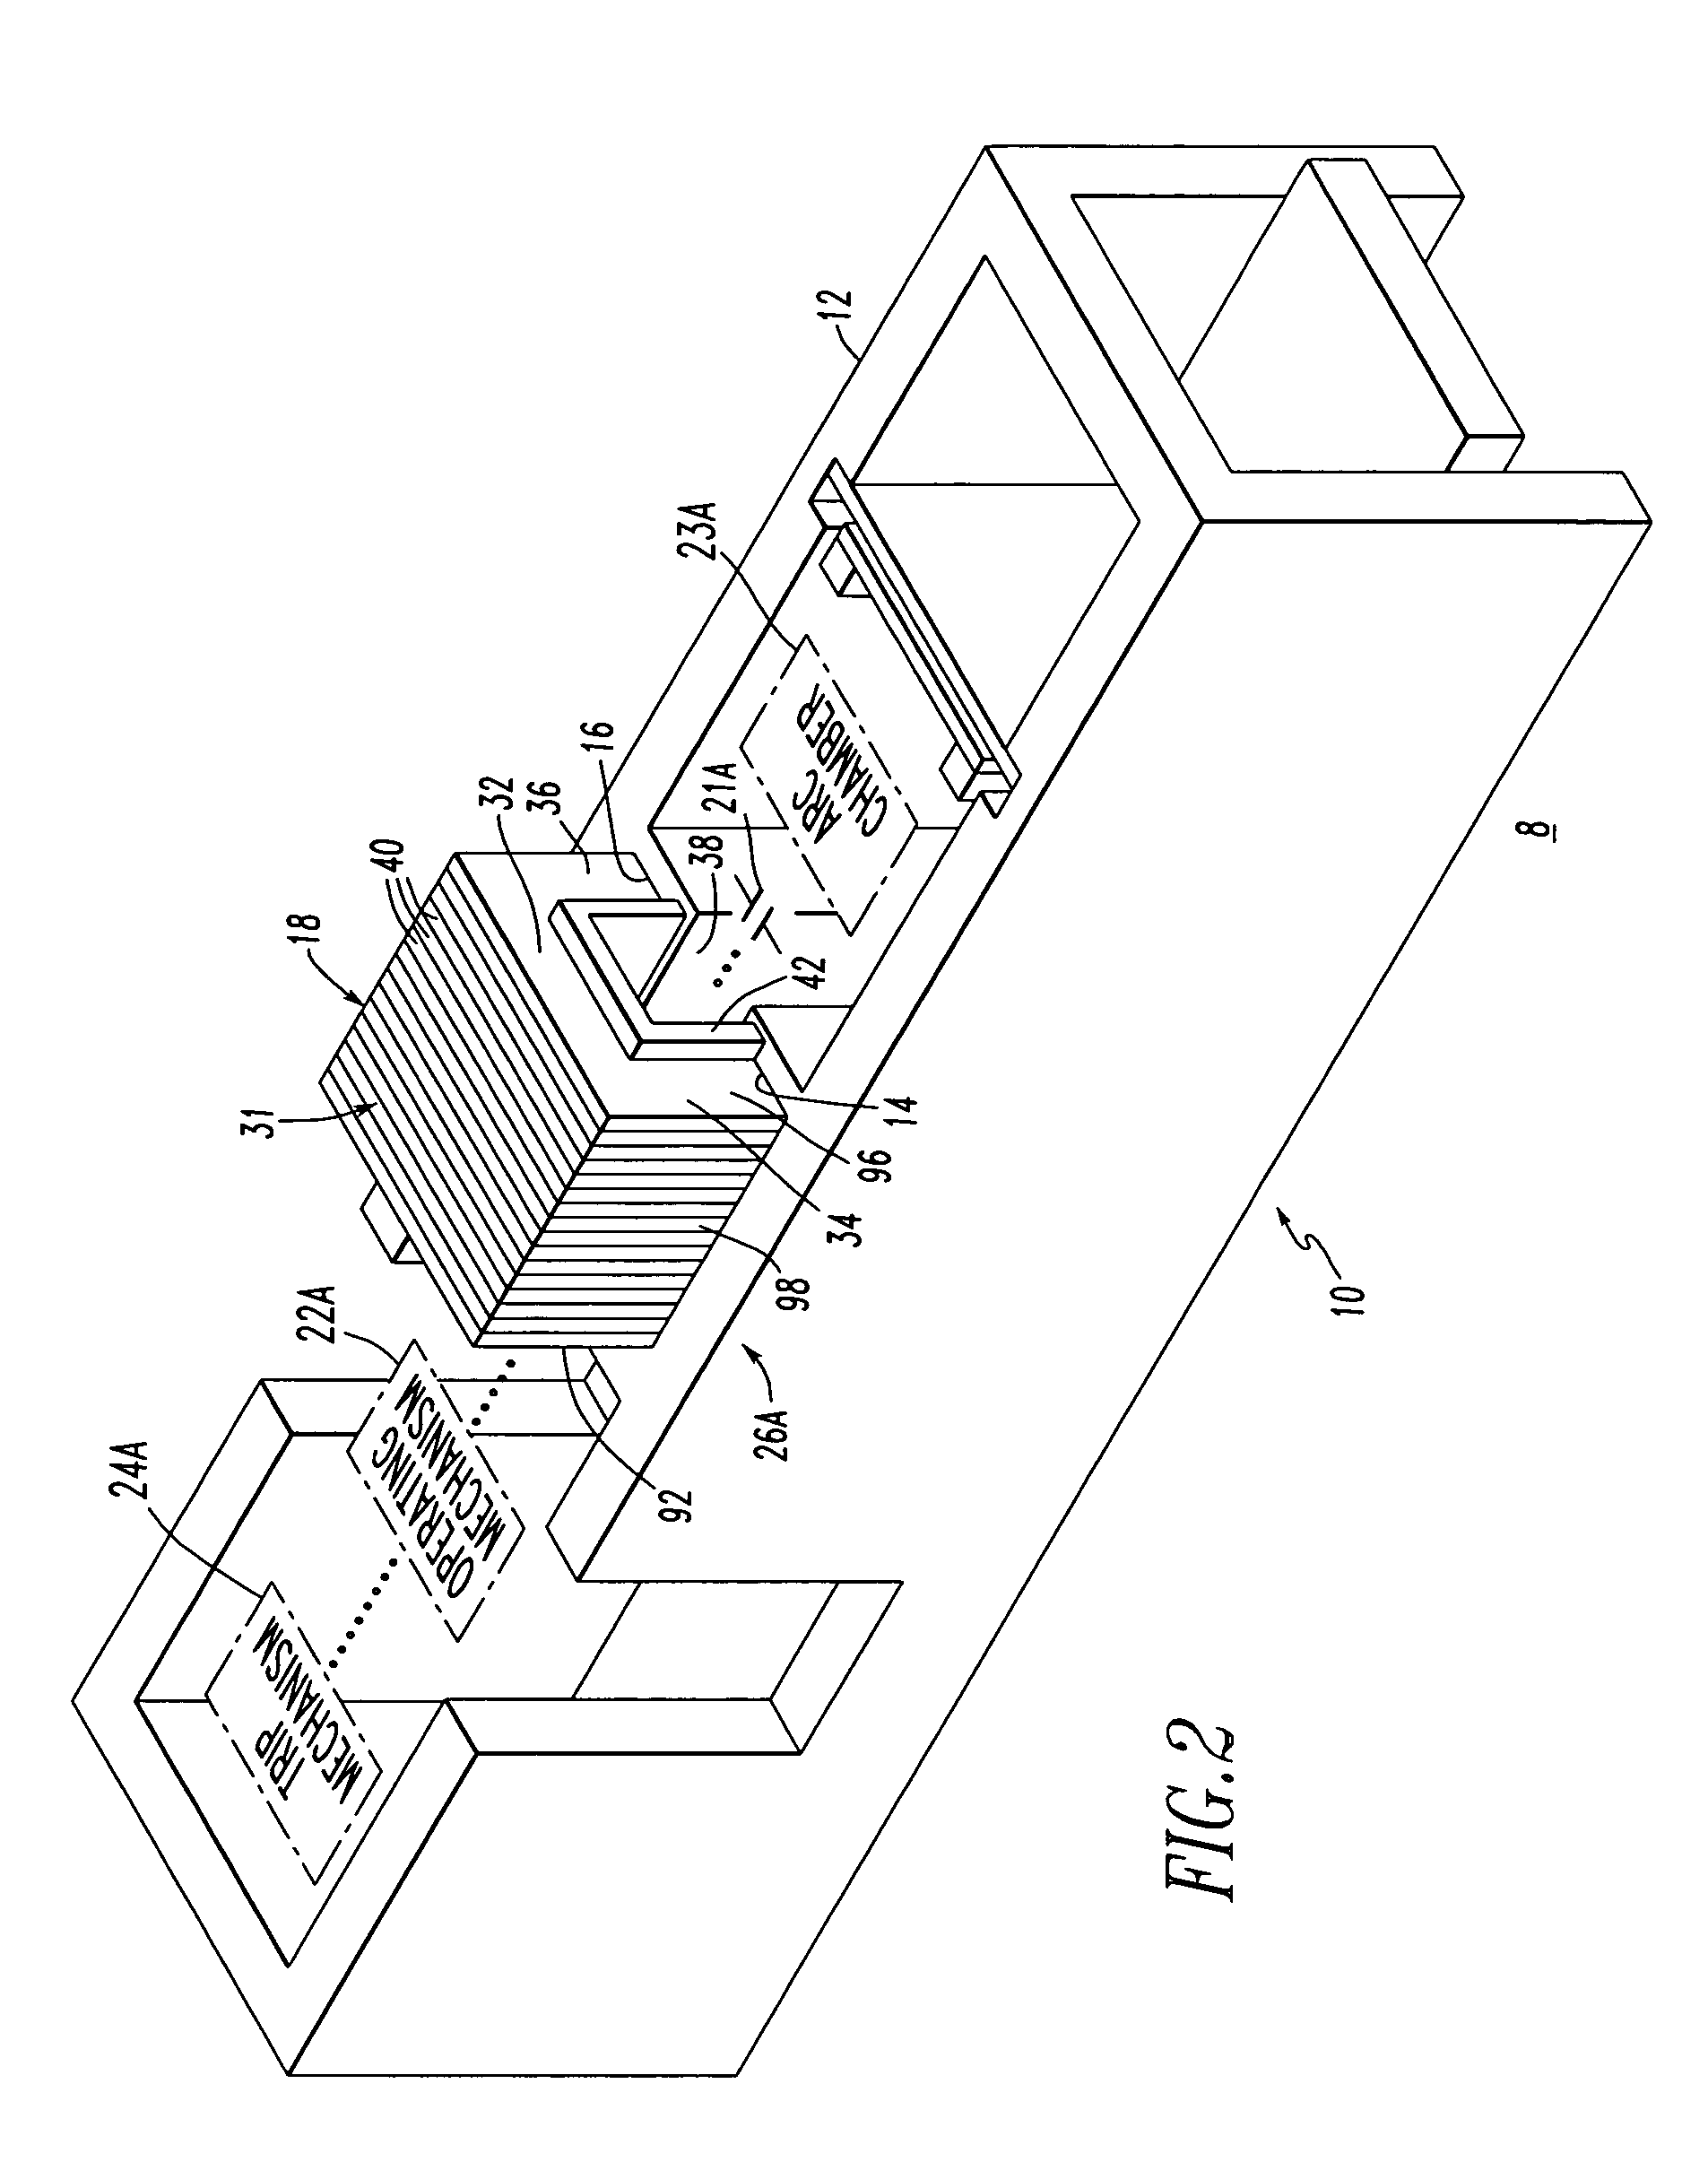 Slot motor including legs engaging openings of circuit breaker housing and electrical switching apparatus employing the same